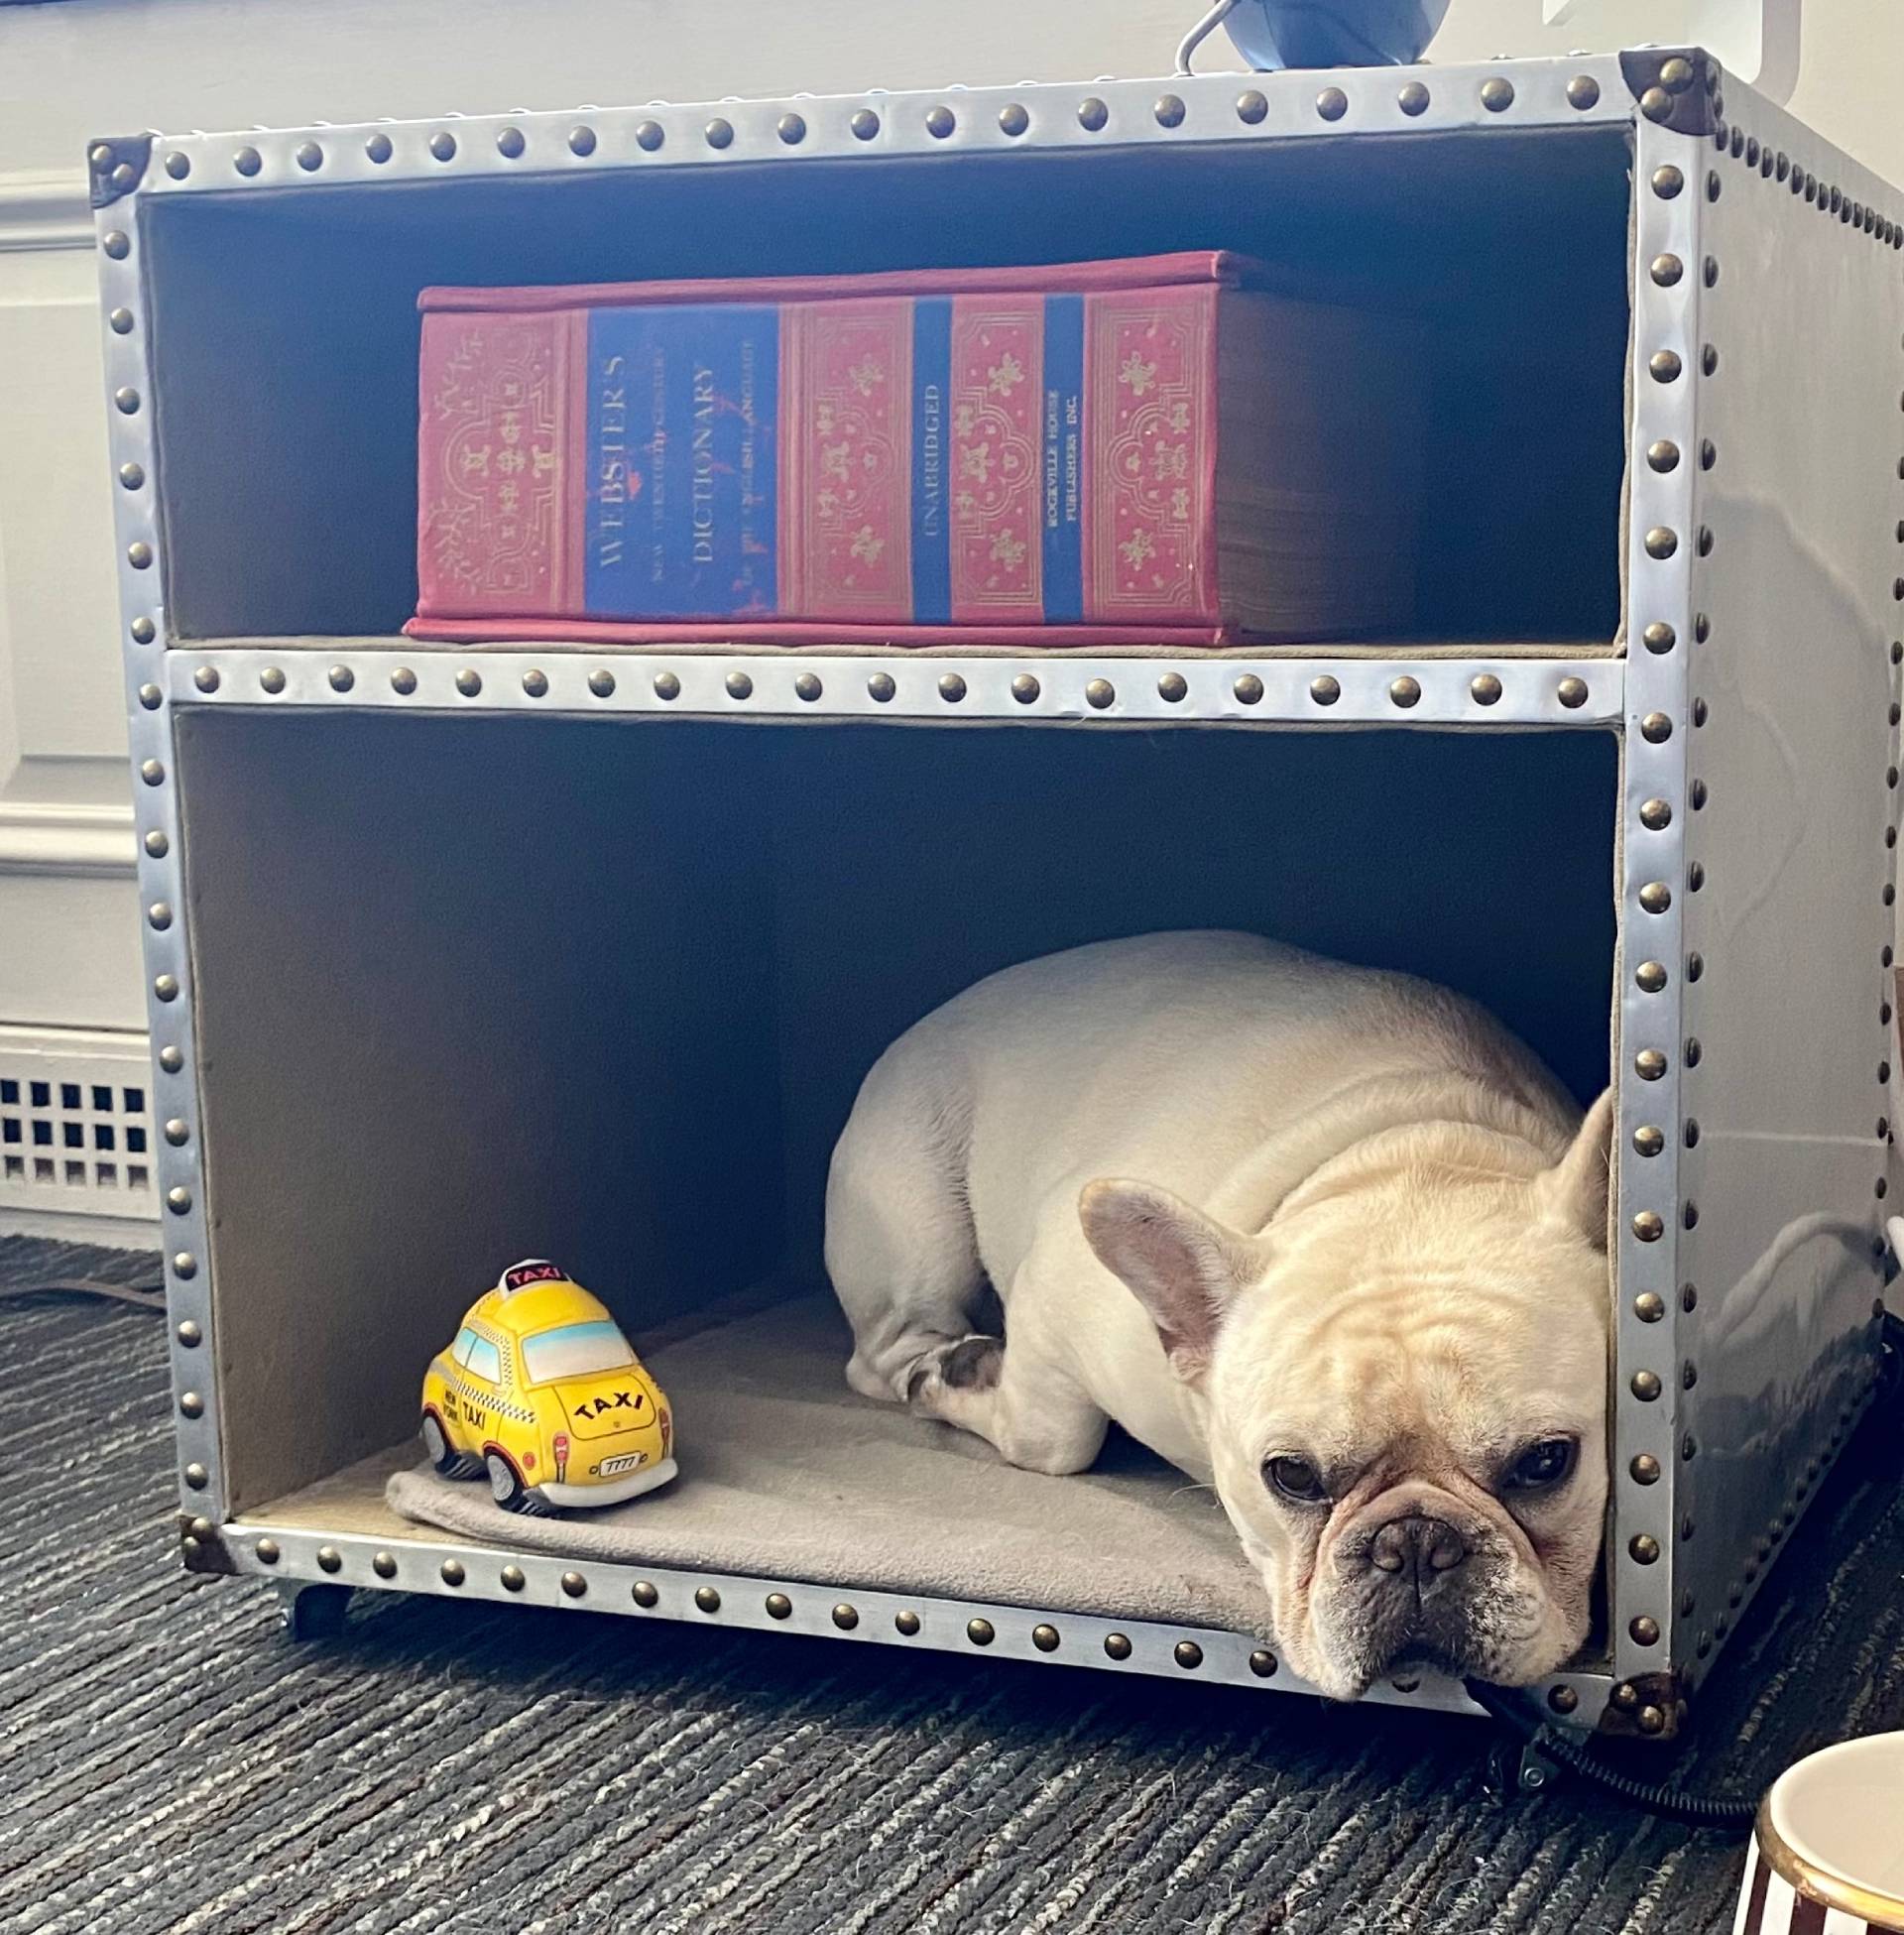 A dog laying on its bed in the middle of an open book case.